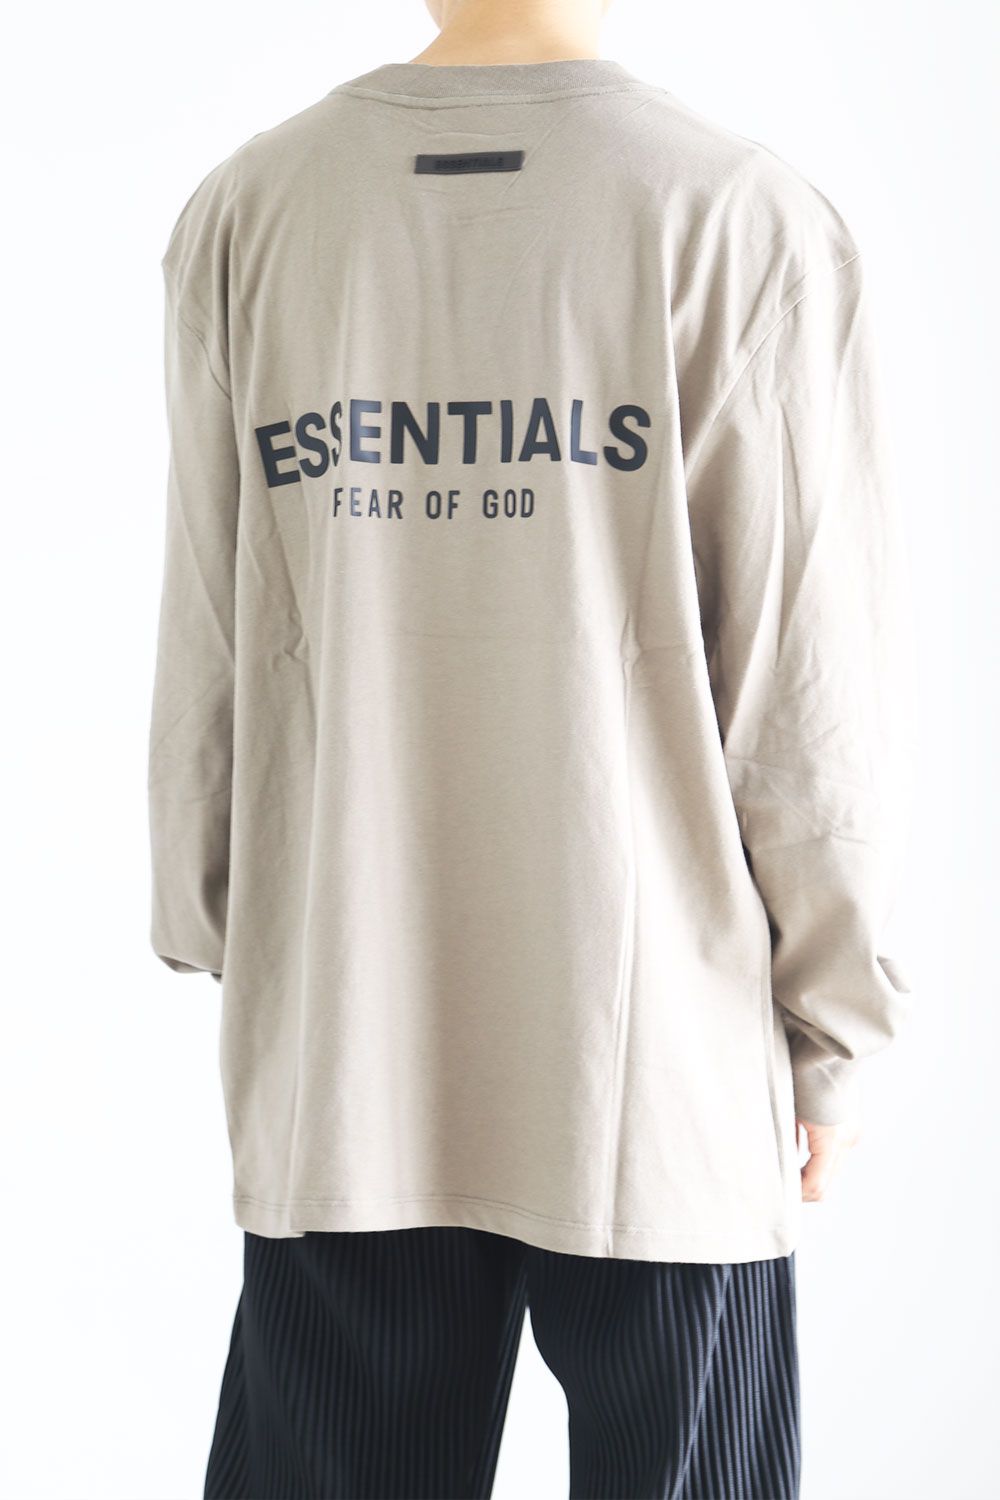 FOG ESSENTIALS - 21SS BACK LOGO L/S TEE (RUBBER) / ライト 